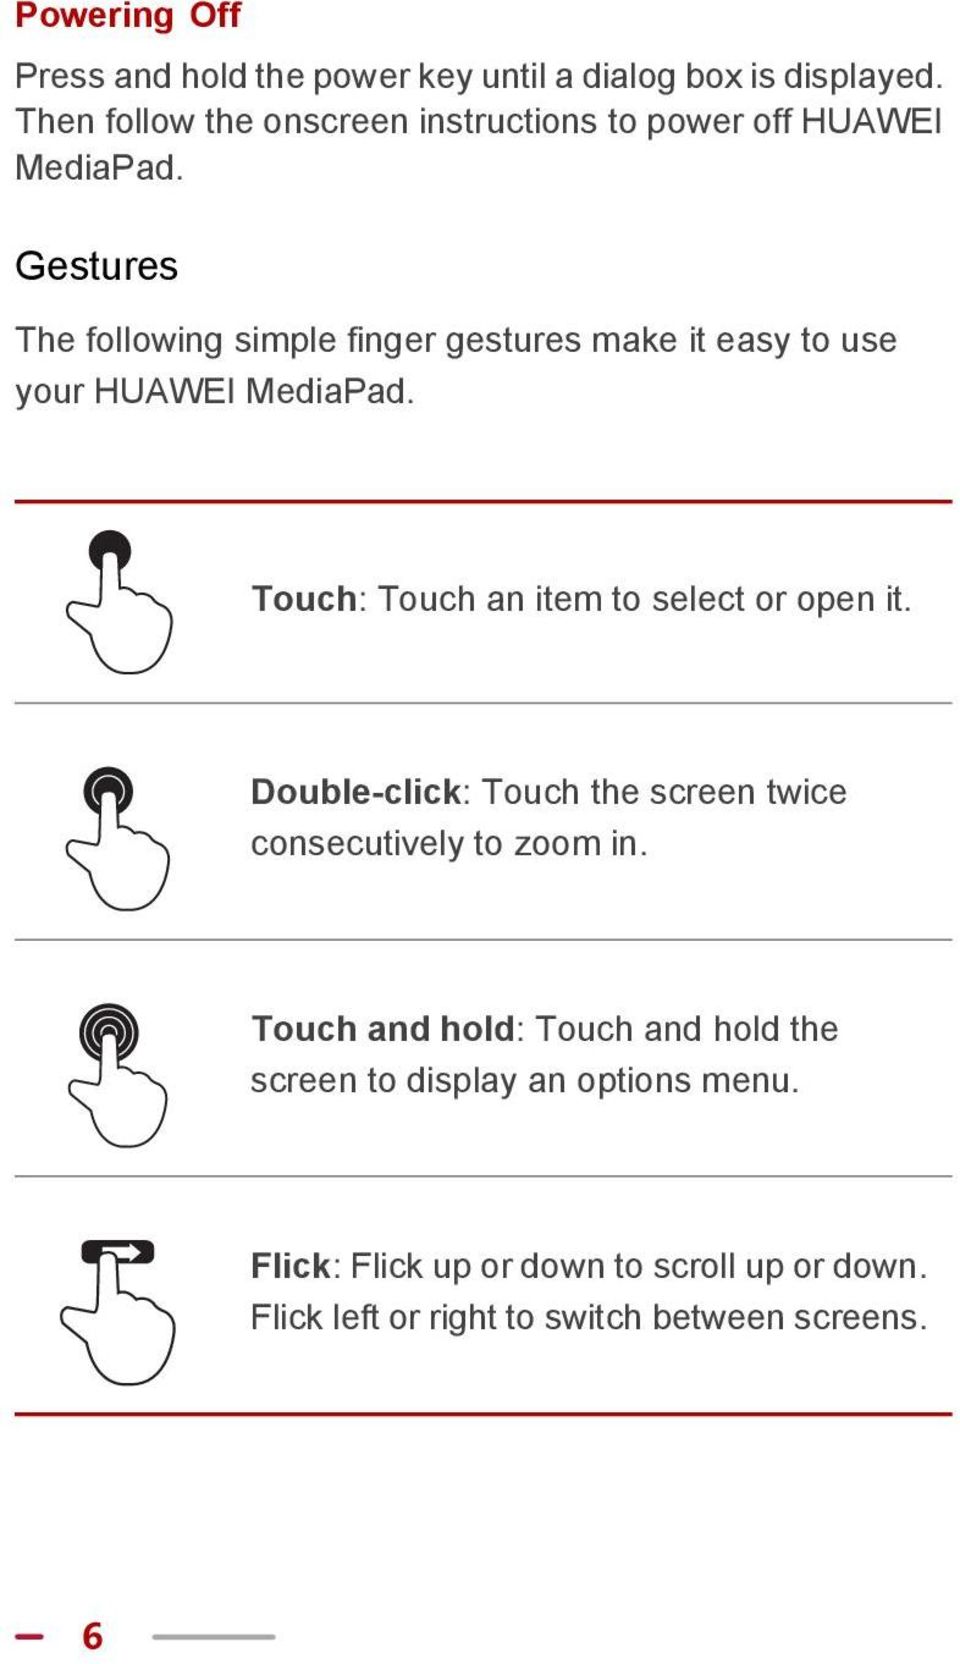 Gestures The following simple finger gestures make it easy to use your HUAWEI MediaPad.